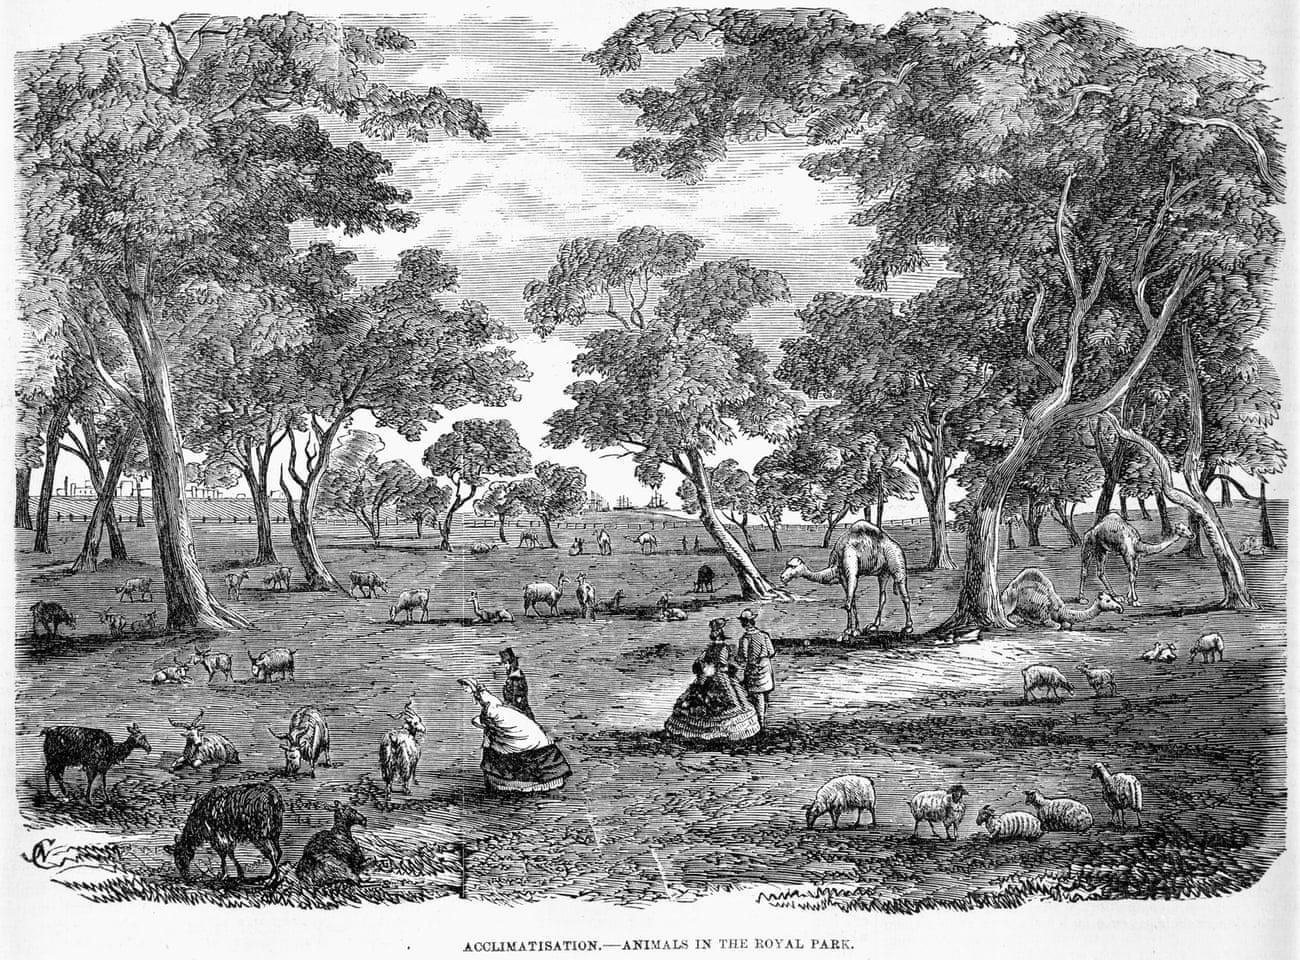 ‘Acclimatisation’: artist Edgar Ray’s depiction of animals in Royal Park, Melbourne, from the Illustrated Australian Mail, 1862.